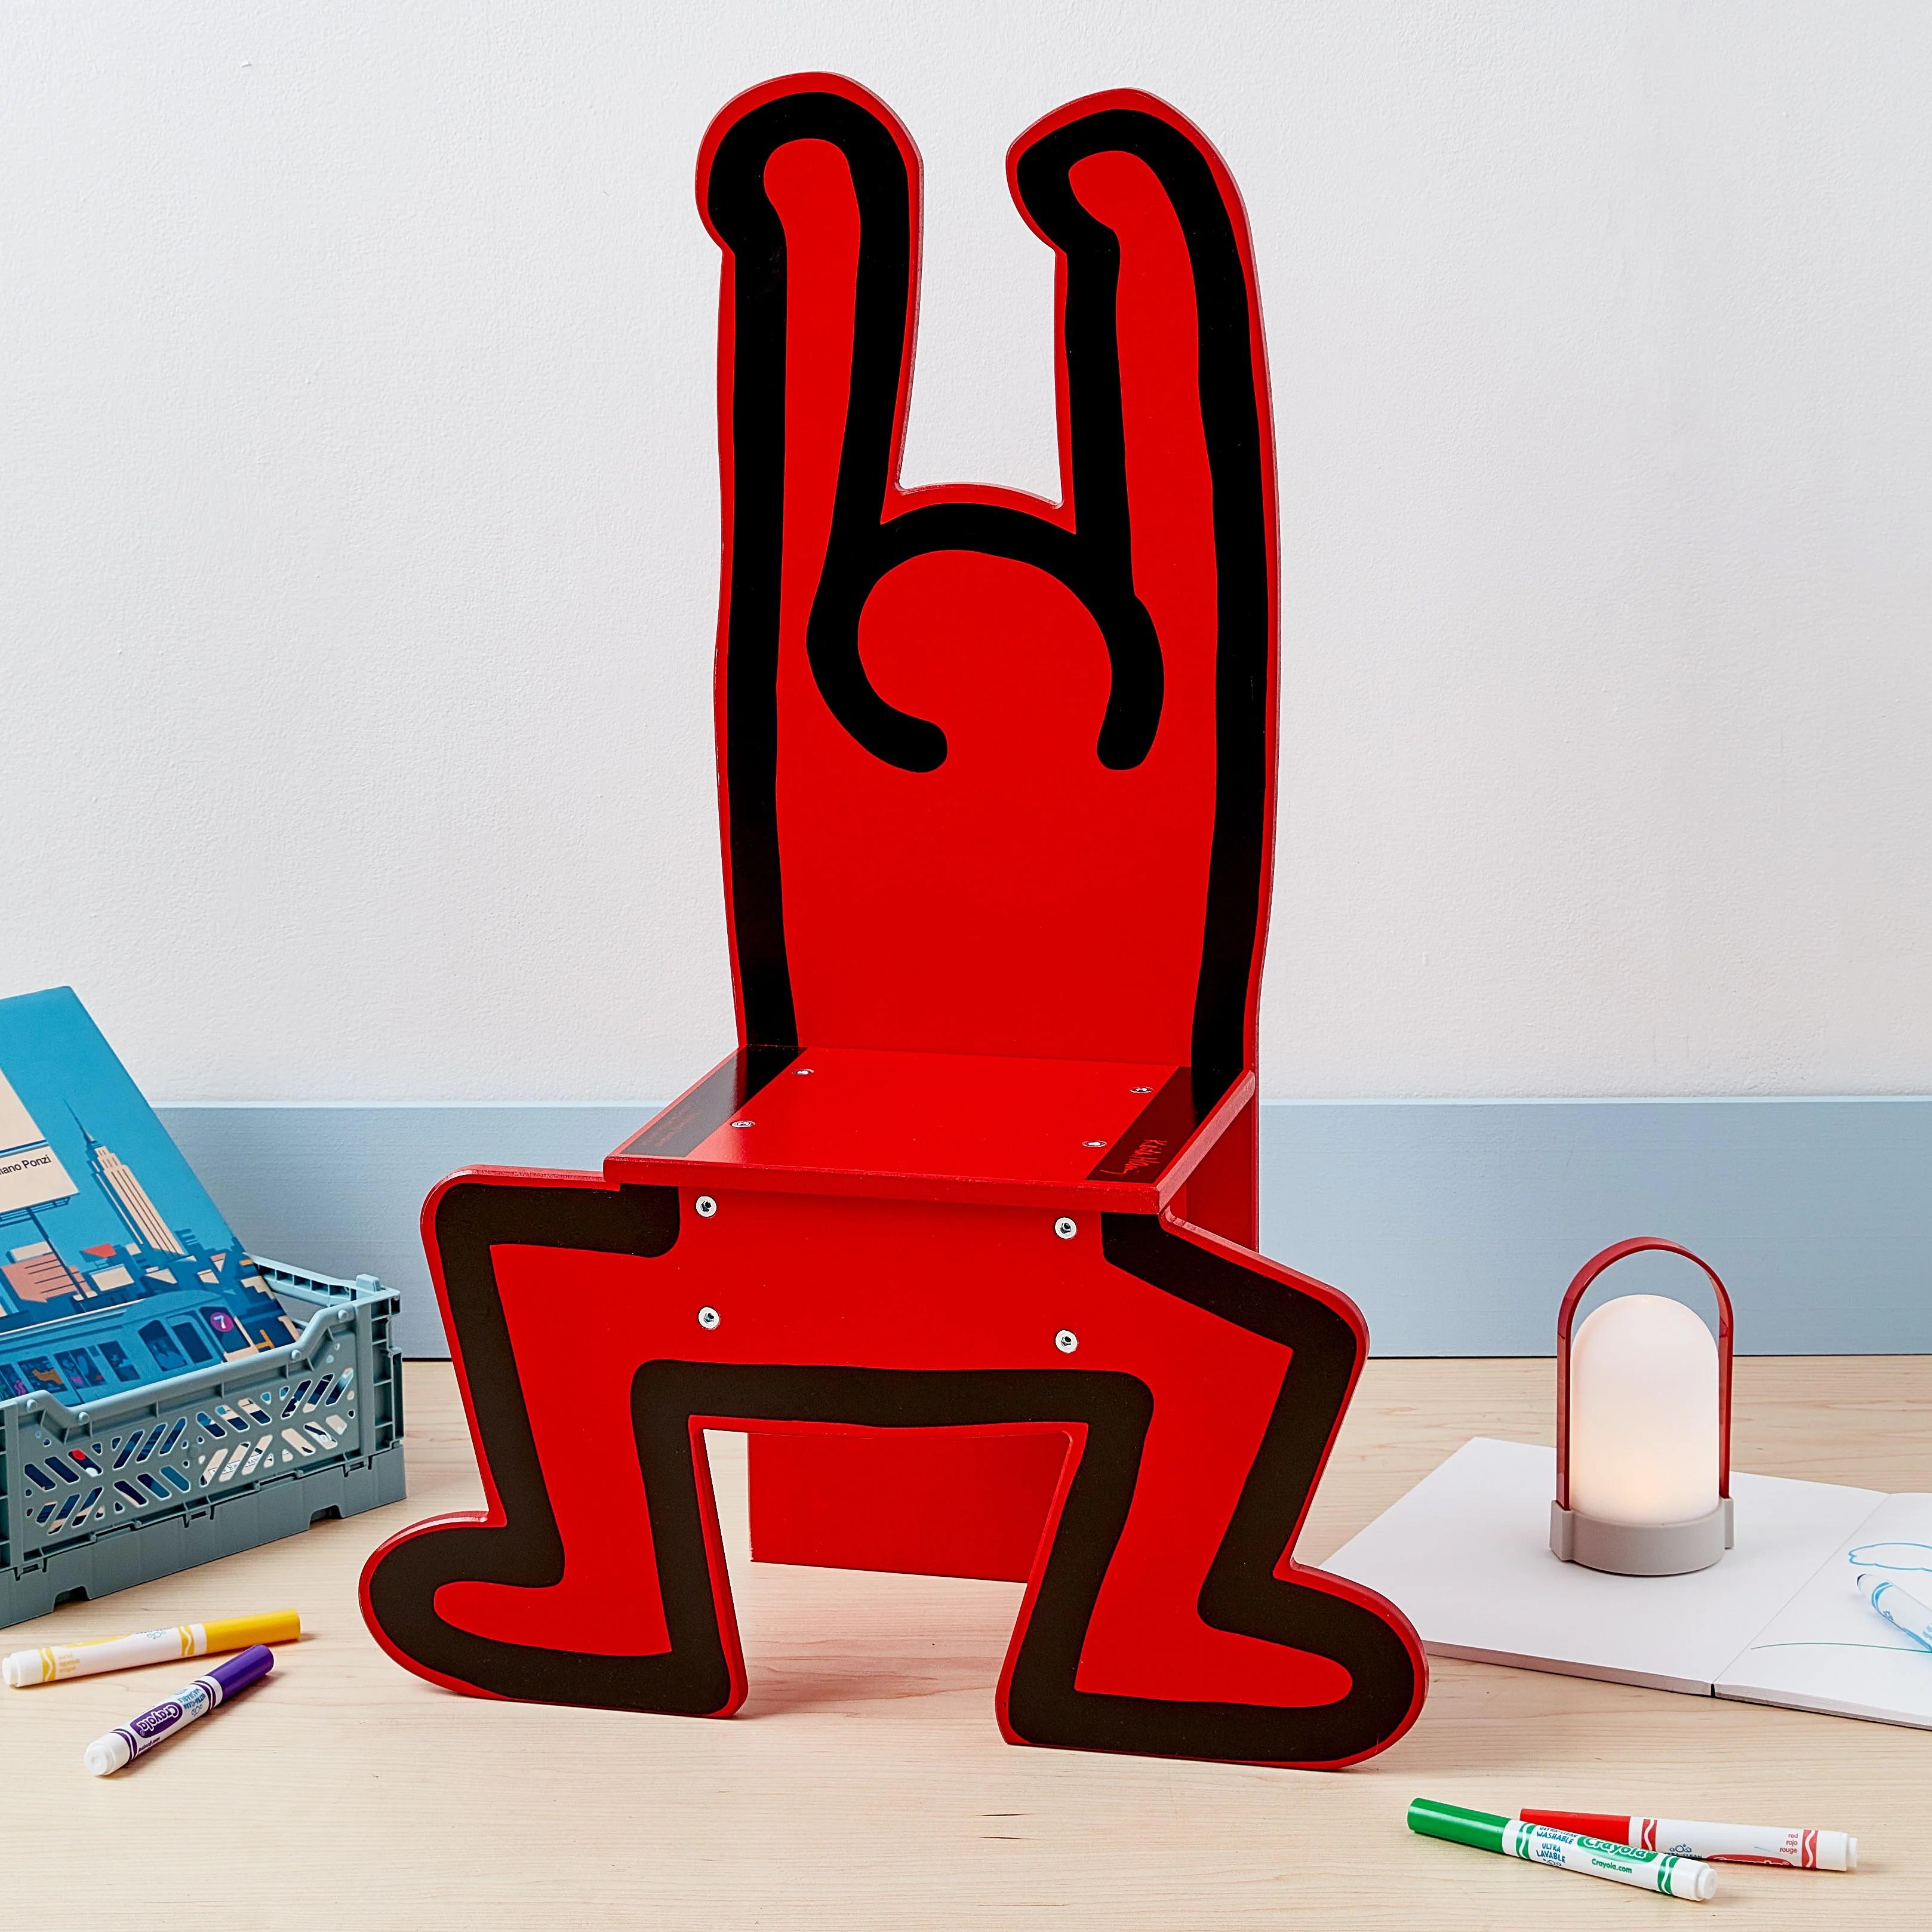 One of Keith Haring’s iconic and energetic figures that appeared in many of his paintings and sculptures during the 1980s is interpreted by French brand Vilac for this children’s chair. The Keith Haring Kids’ Chair is made in France from lacquered